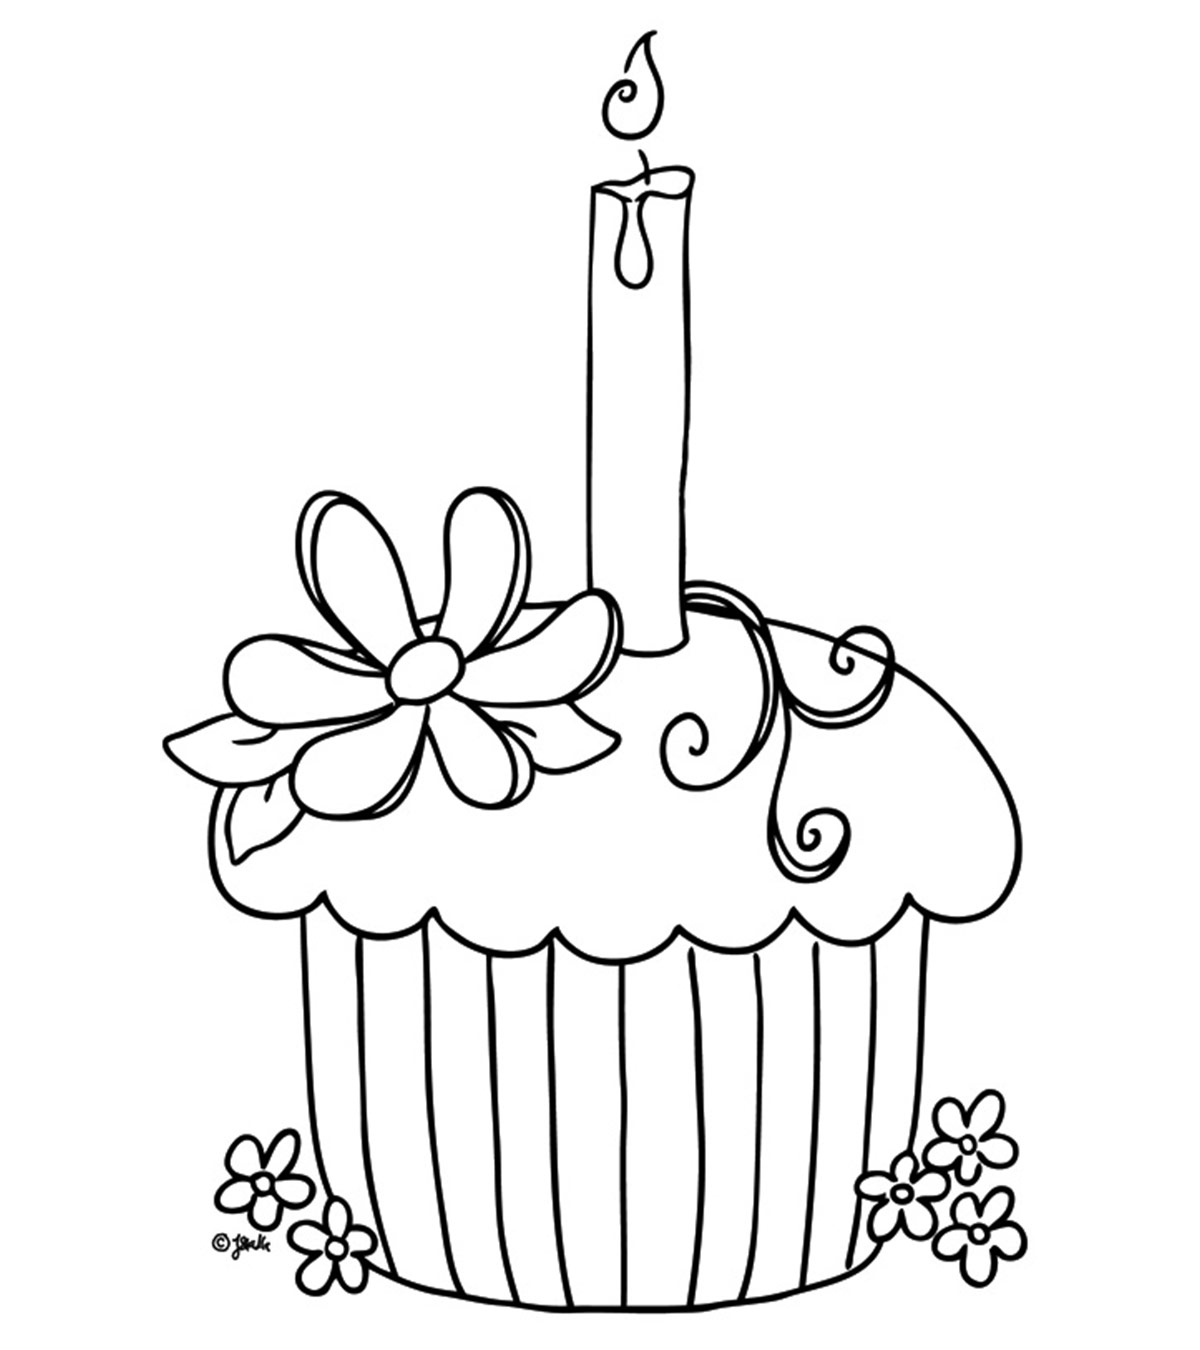 Download View Unicorn Cake Coloring Pages Pictures - Buychickadee